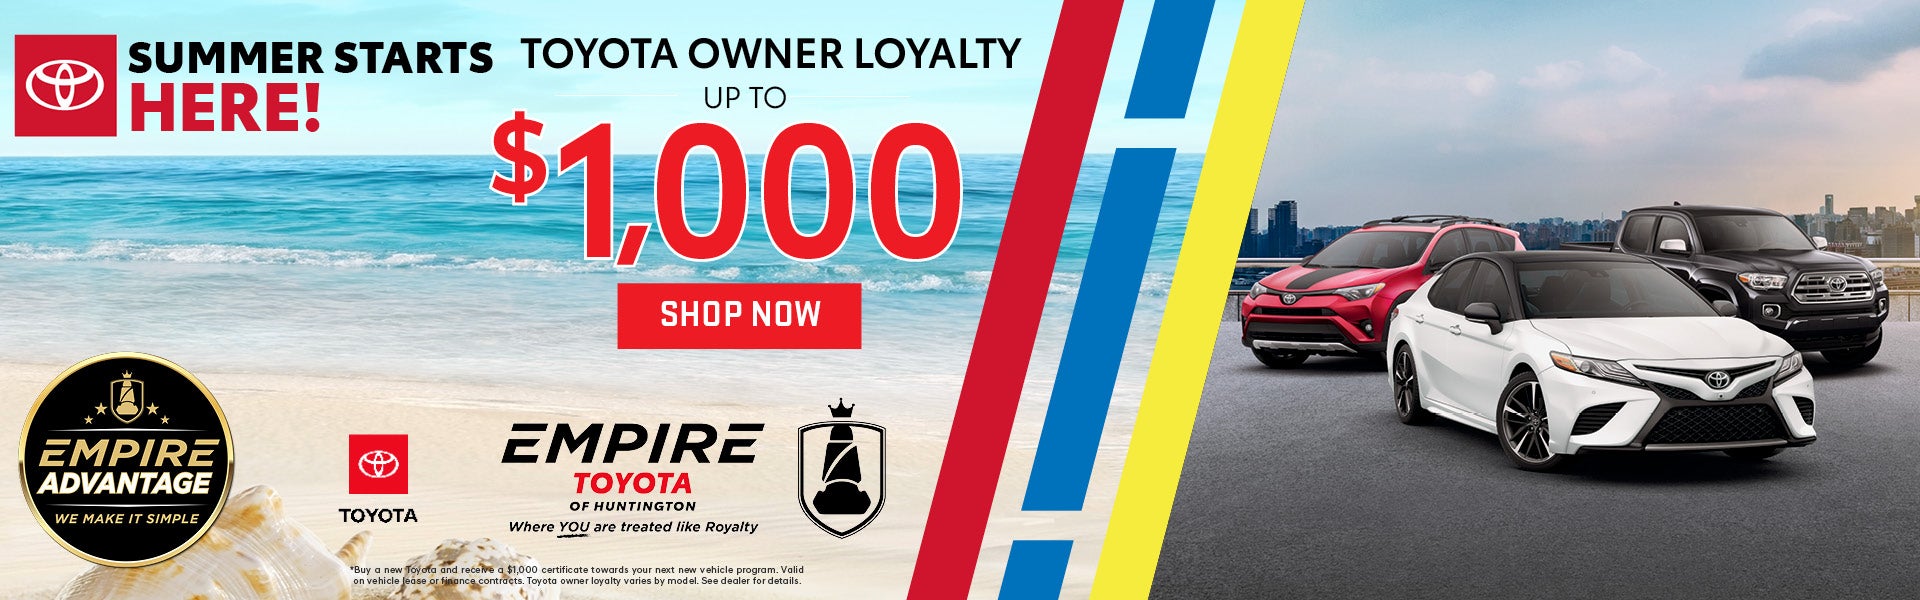 Toyota Owner Loyalty up to $1,000